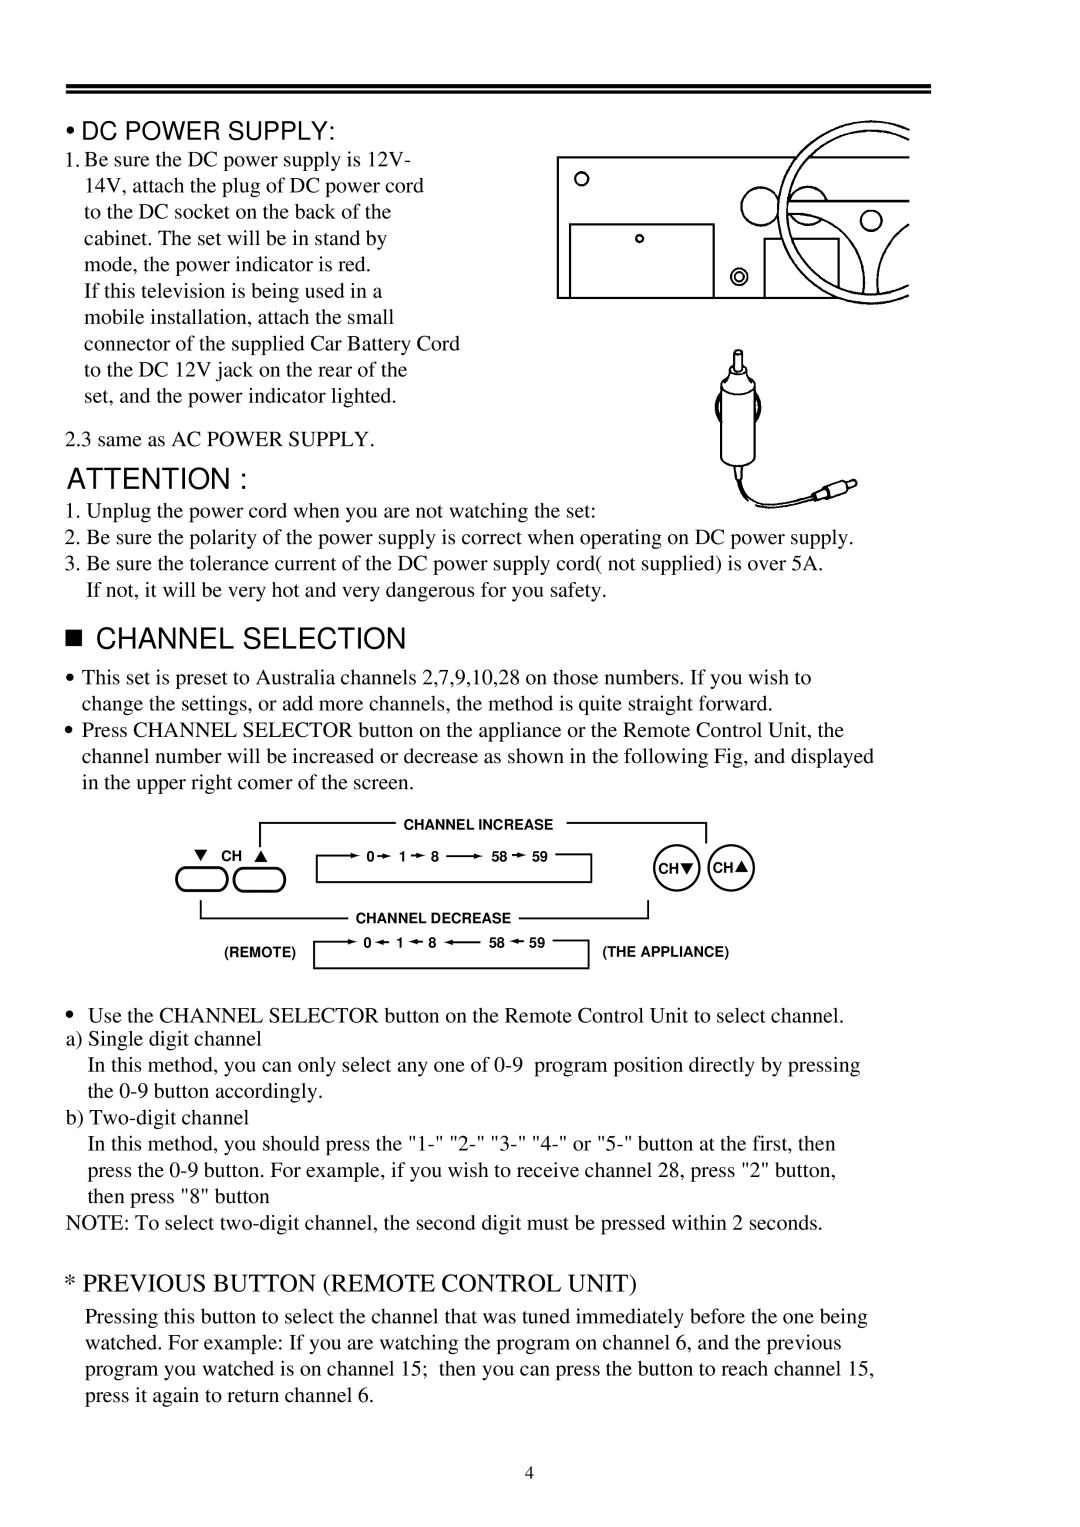 Palsonic 2418 owner manual Channel Selection, Dc Power Supply, Previous Button Remote Control Unit 